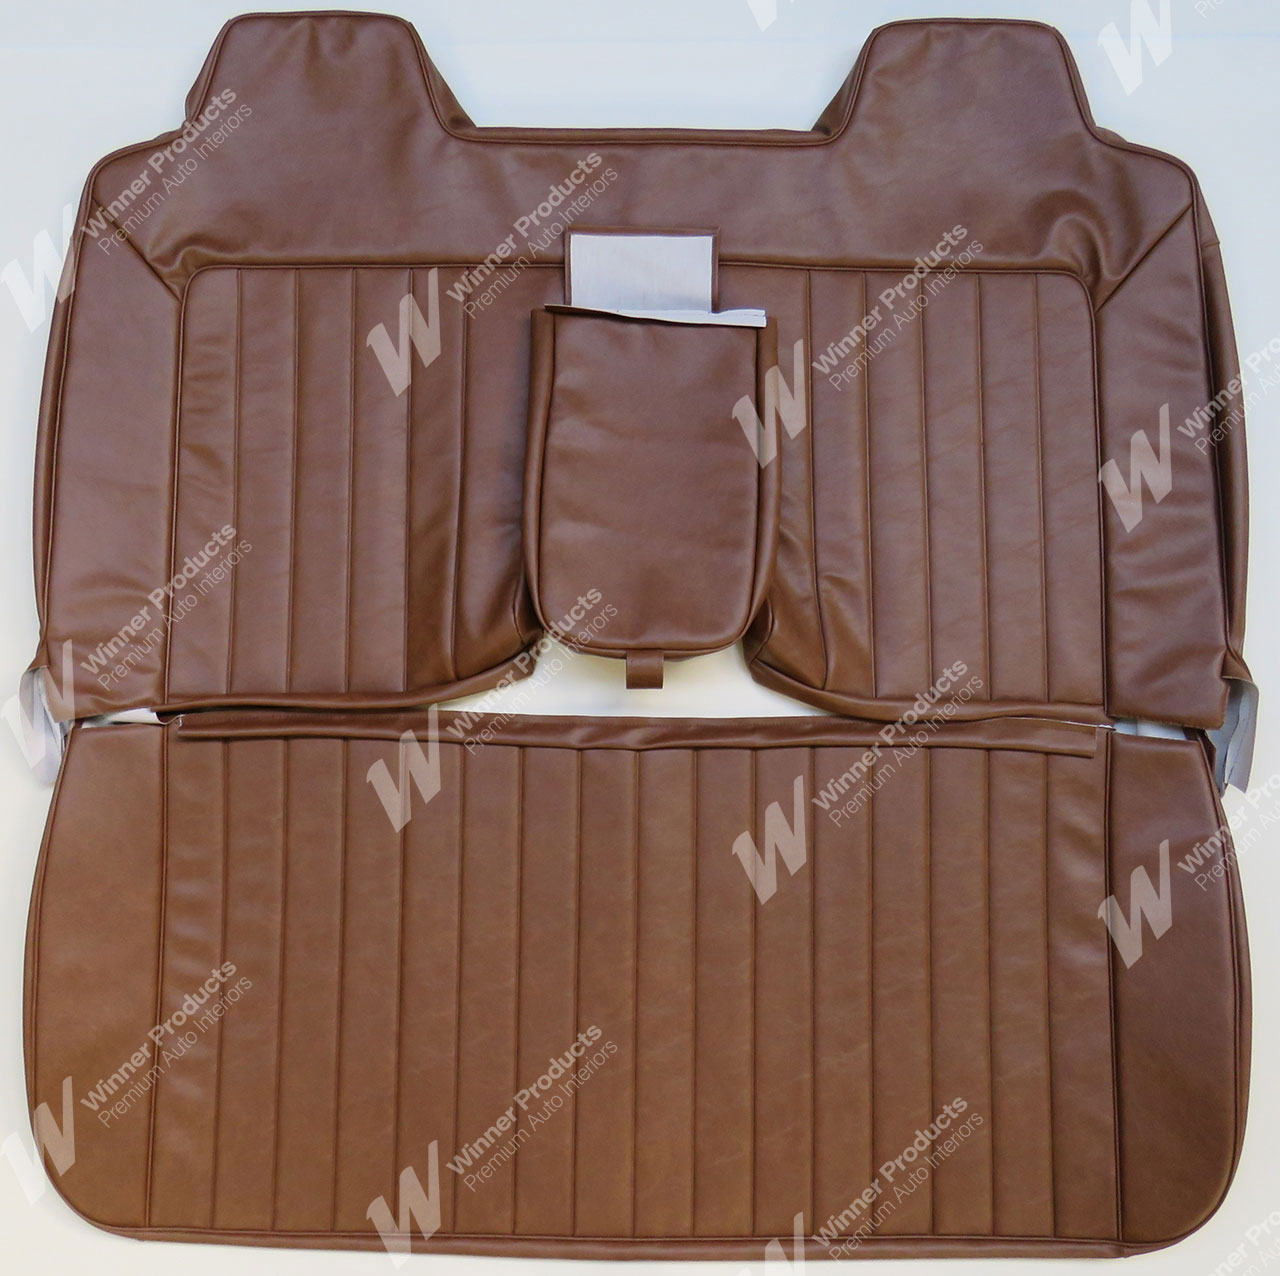 Holden Kingswood HZ Kingswood Ute 67C Tan Seat Covers (Image 1 of 5)